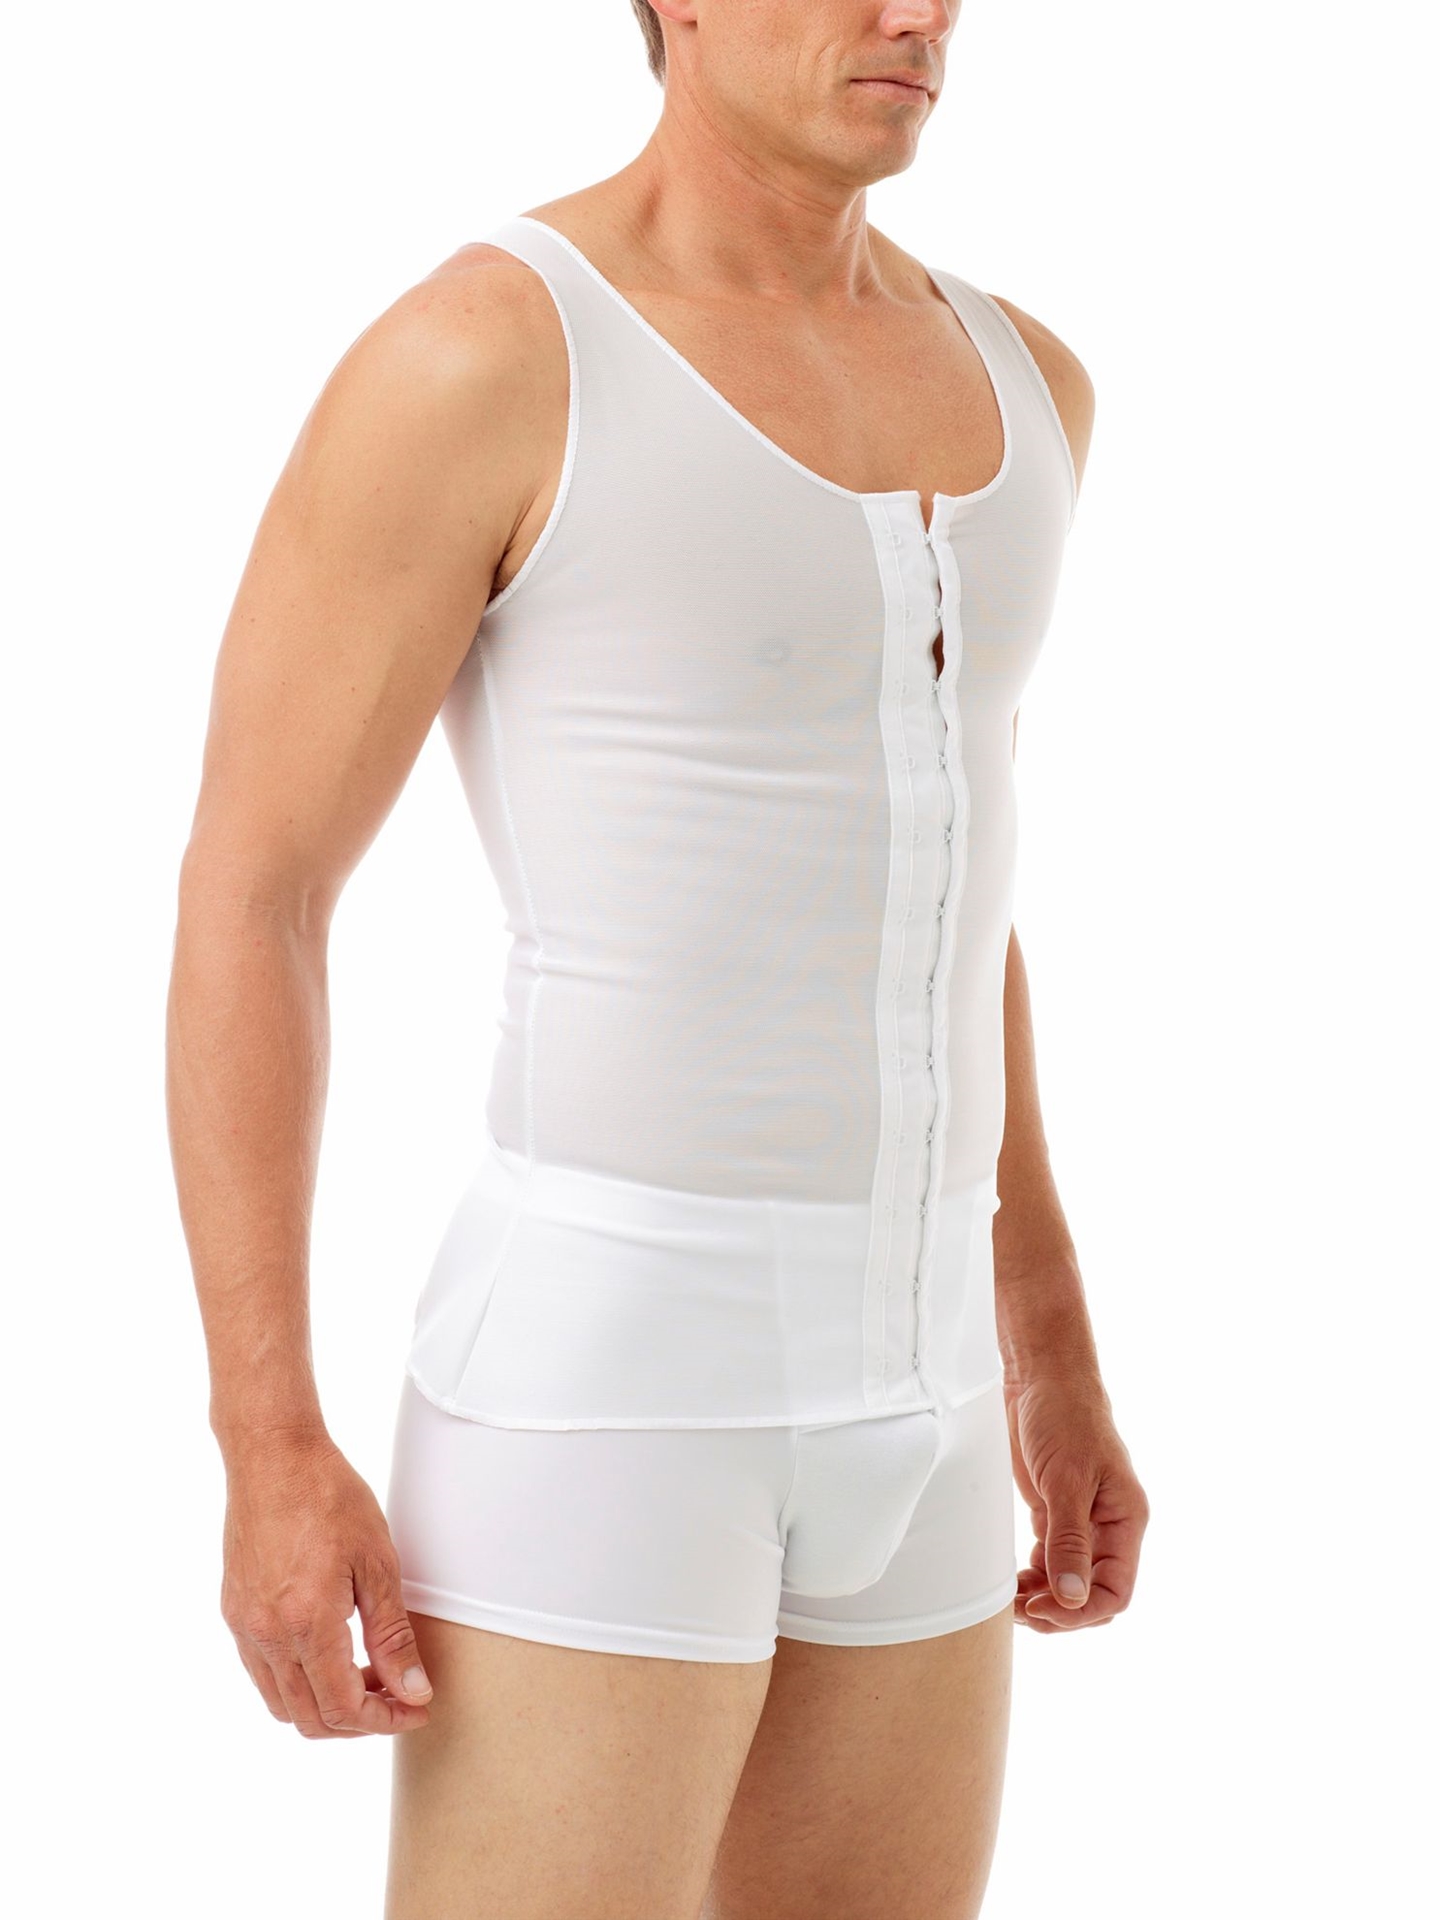 5 Things to Know About Post-Surgical Compression Garments